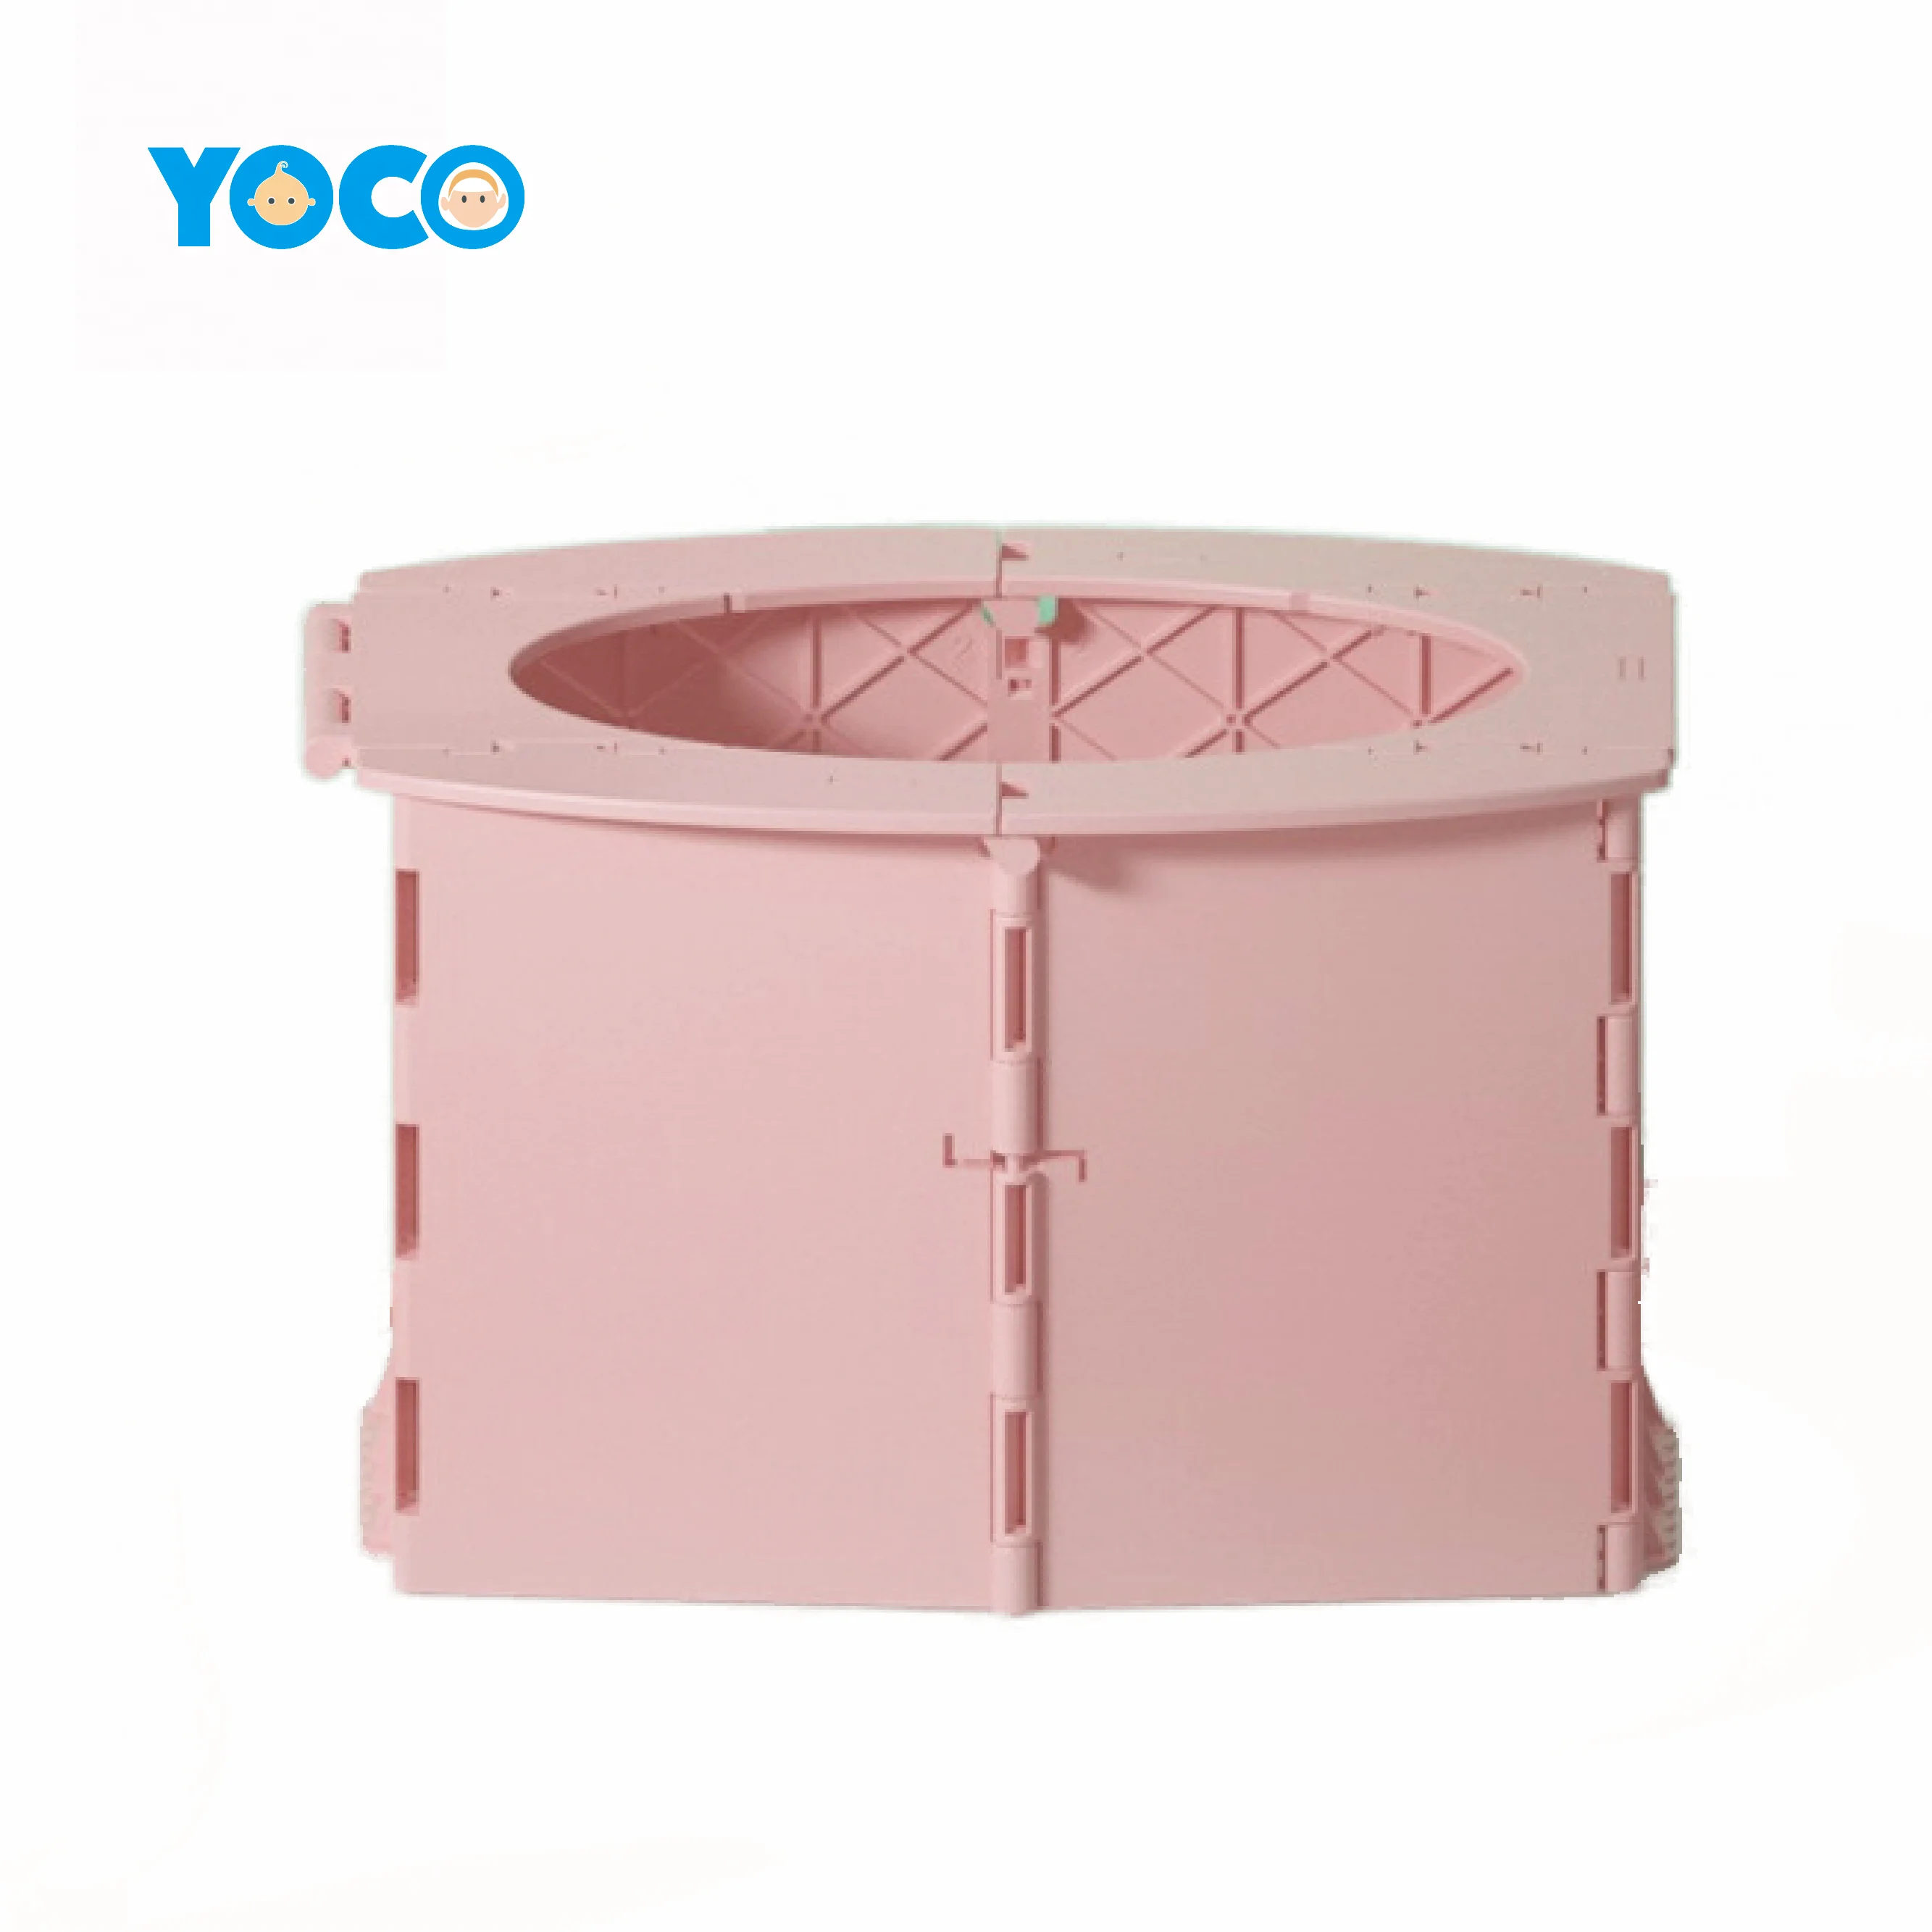 

2021 New Design Portable Toilet for Kids Reusable Foldable Toilet for Toddler Portable Potty for Car Travel Outdoor Camping